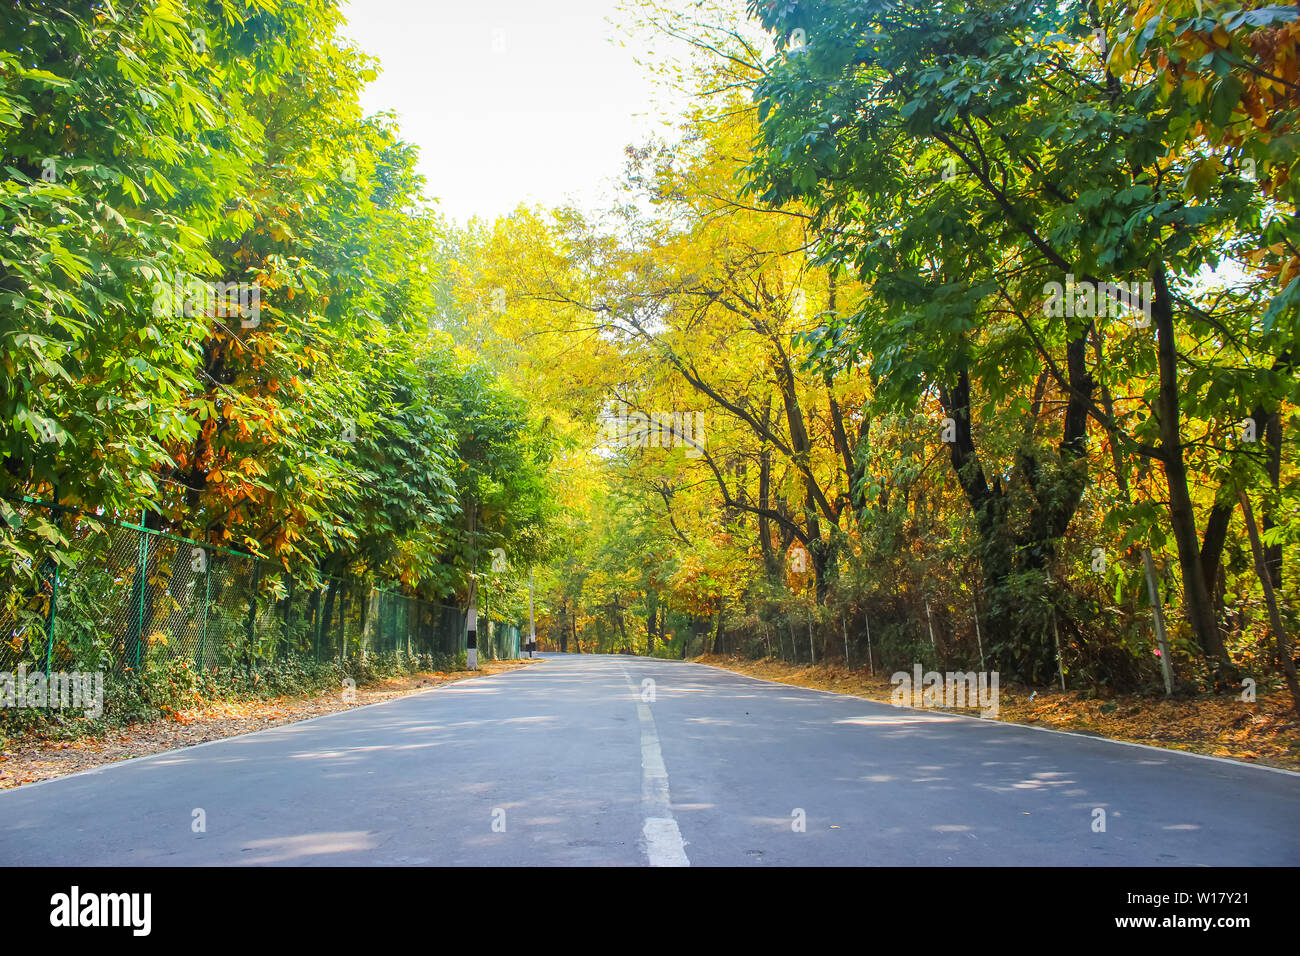 A beautiful wide road passing through the forest with autumn colours in Srinagar, Kashmir Stock Photo